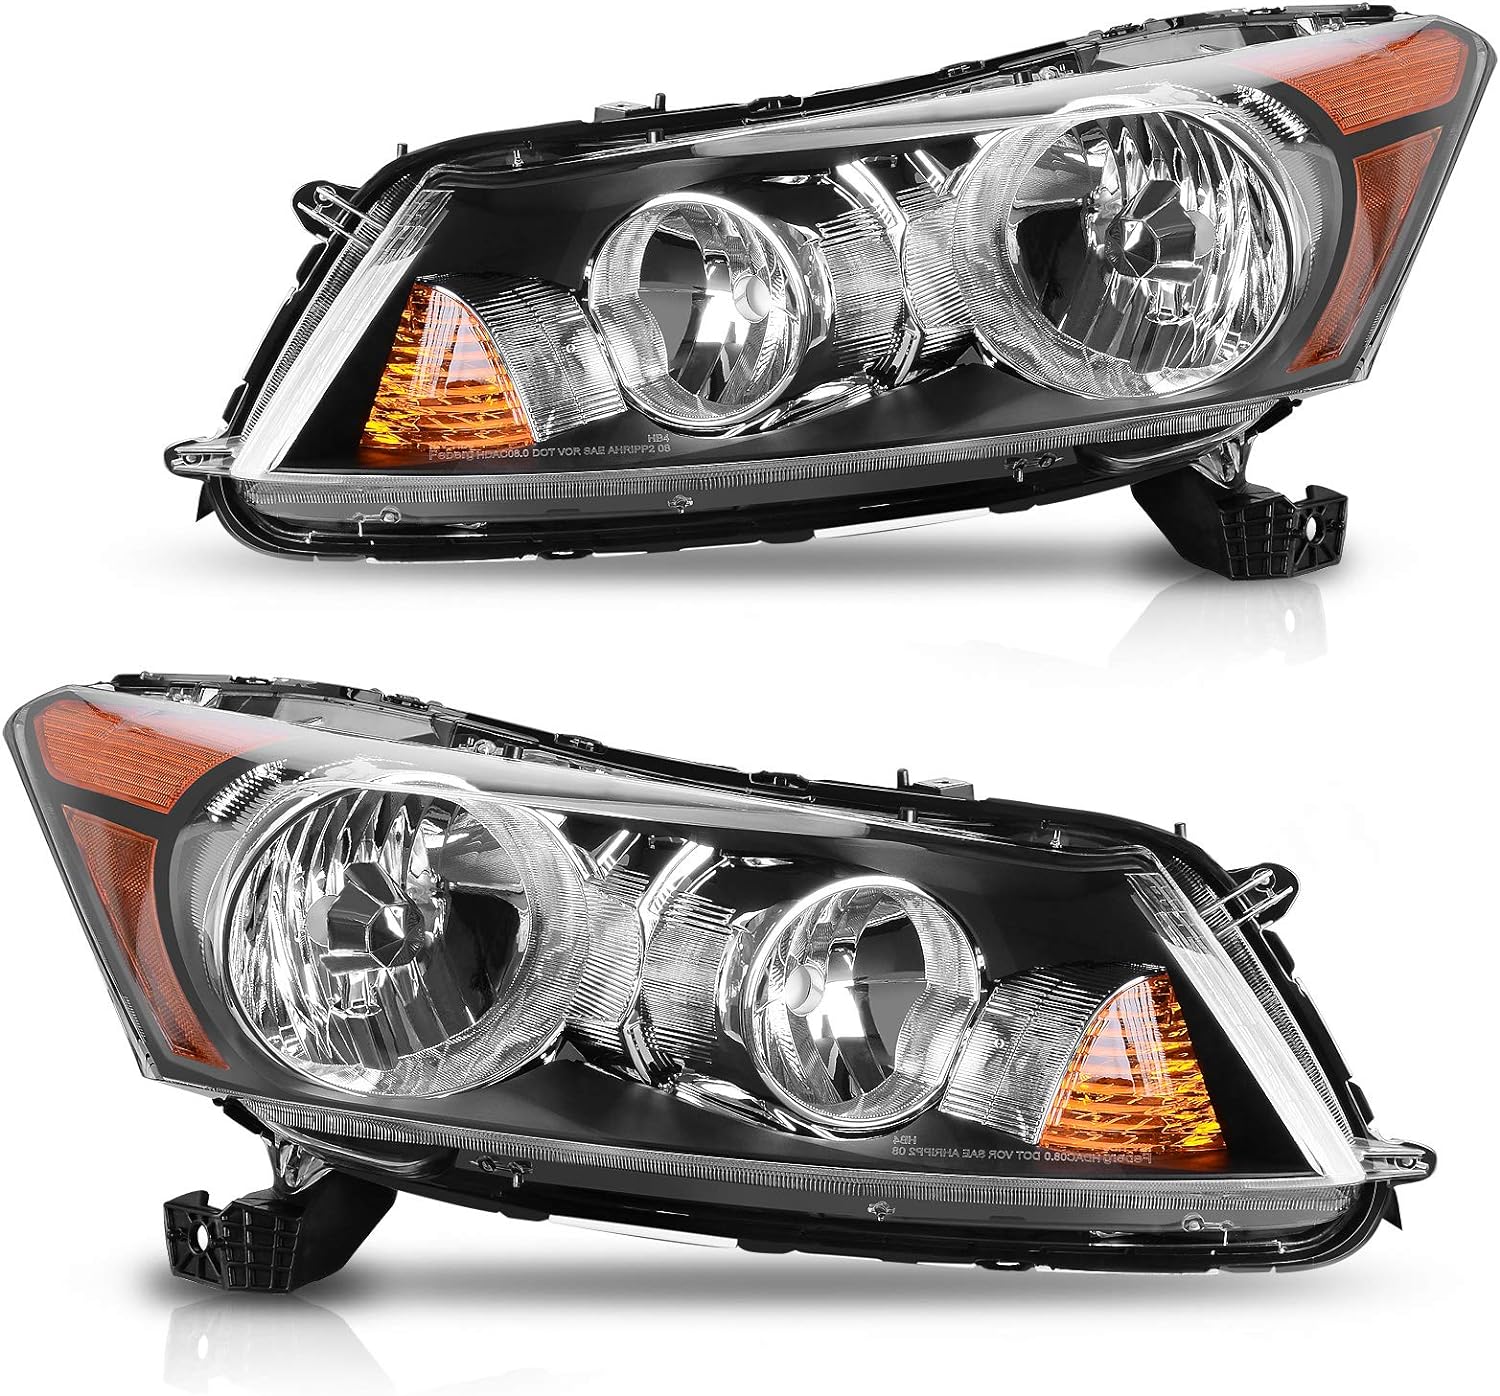 DWVO Headlight Assembly Compatible with 08-12 2008 2009 2010 2011 2012 Accord 4-Door Sedan Headlamps Black Housing Clear Lens Amber Reflector